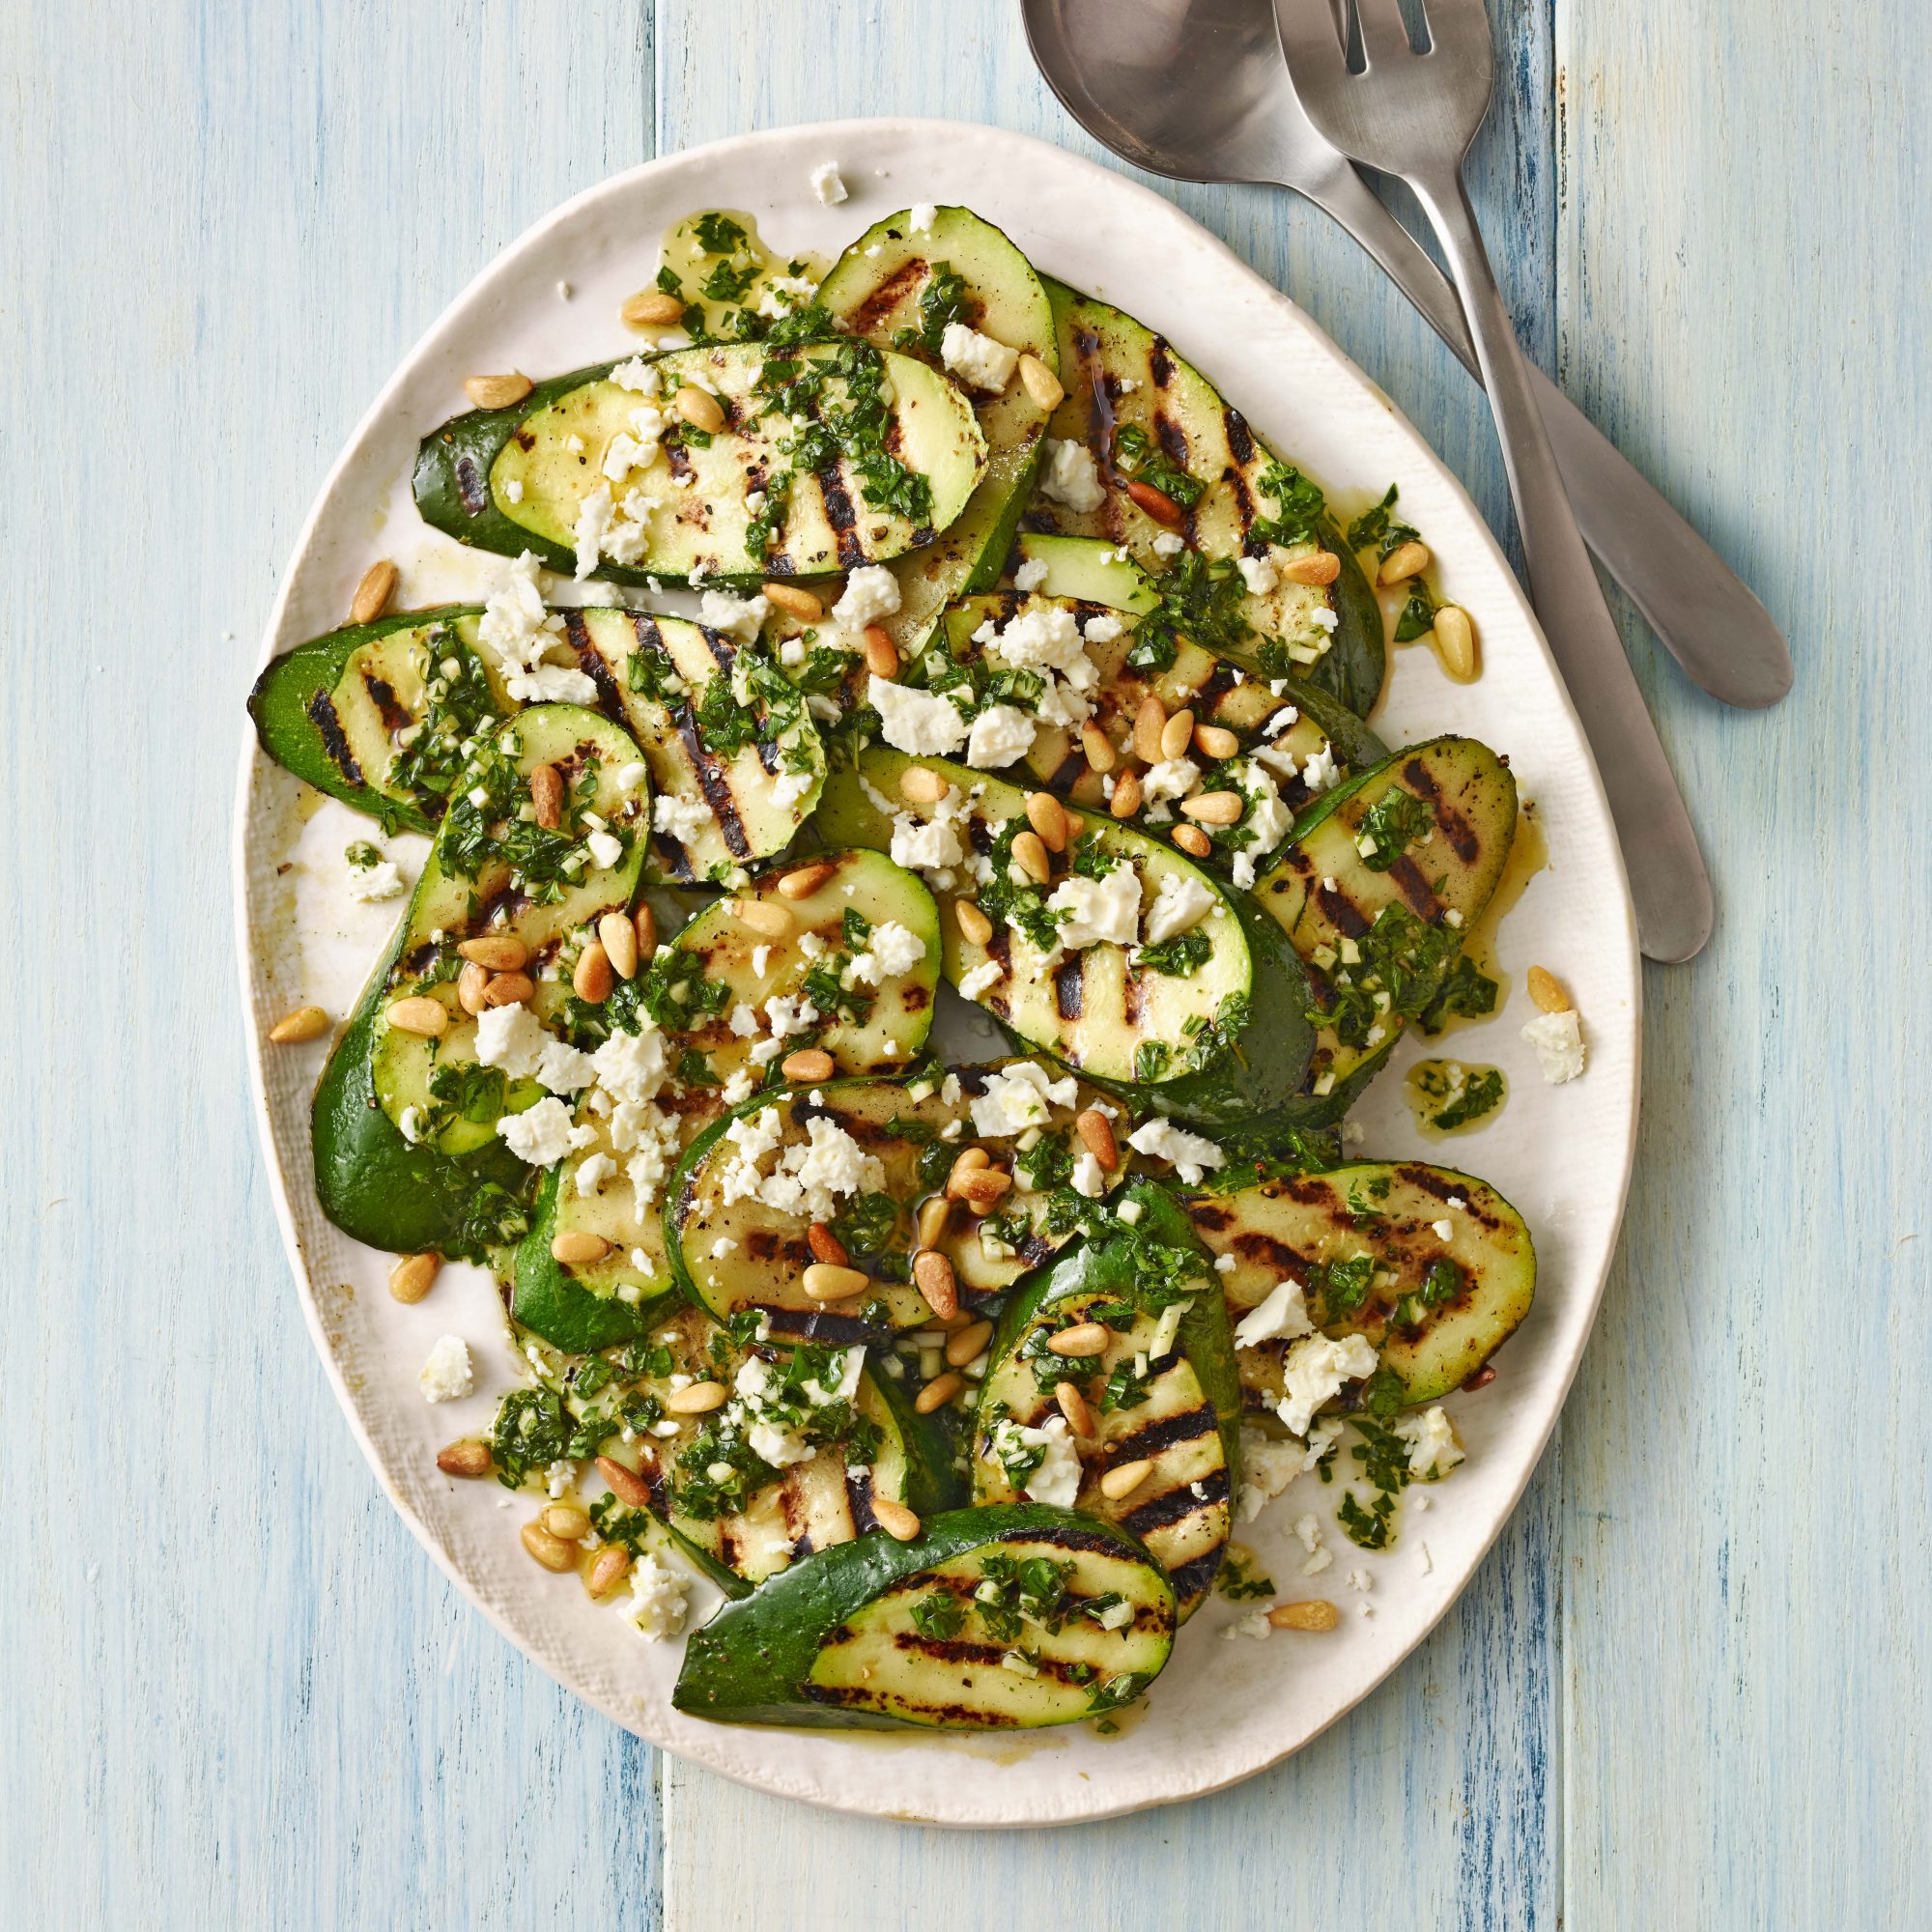 Grilled Zucchini with Feta & Pine Nuts